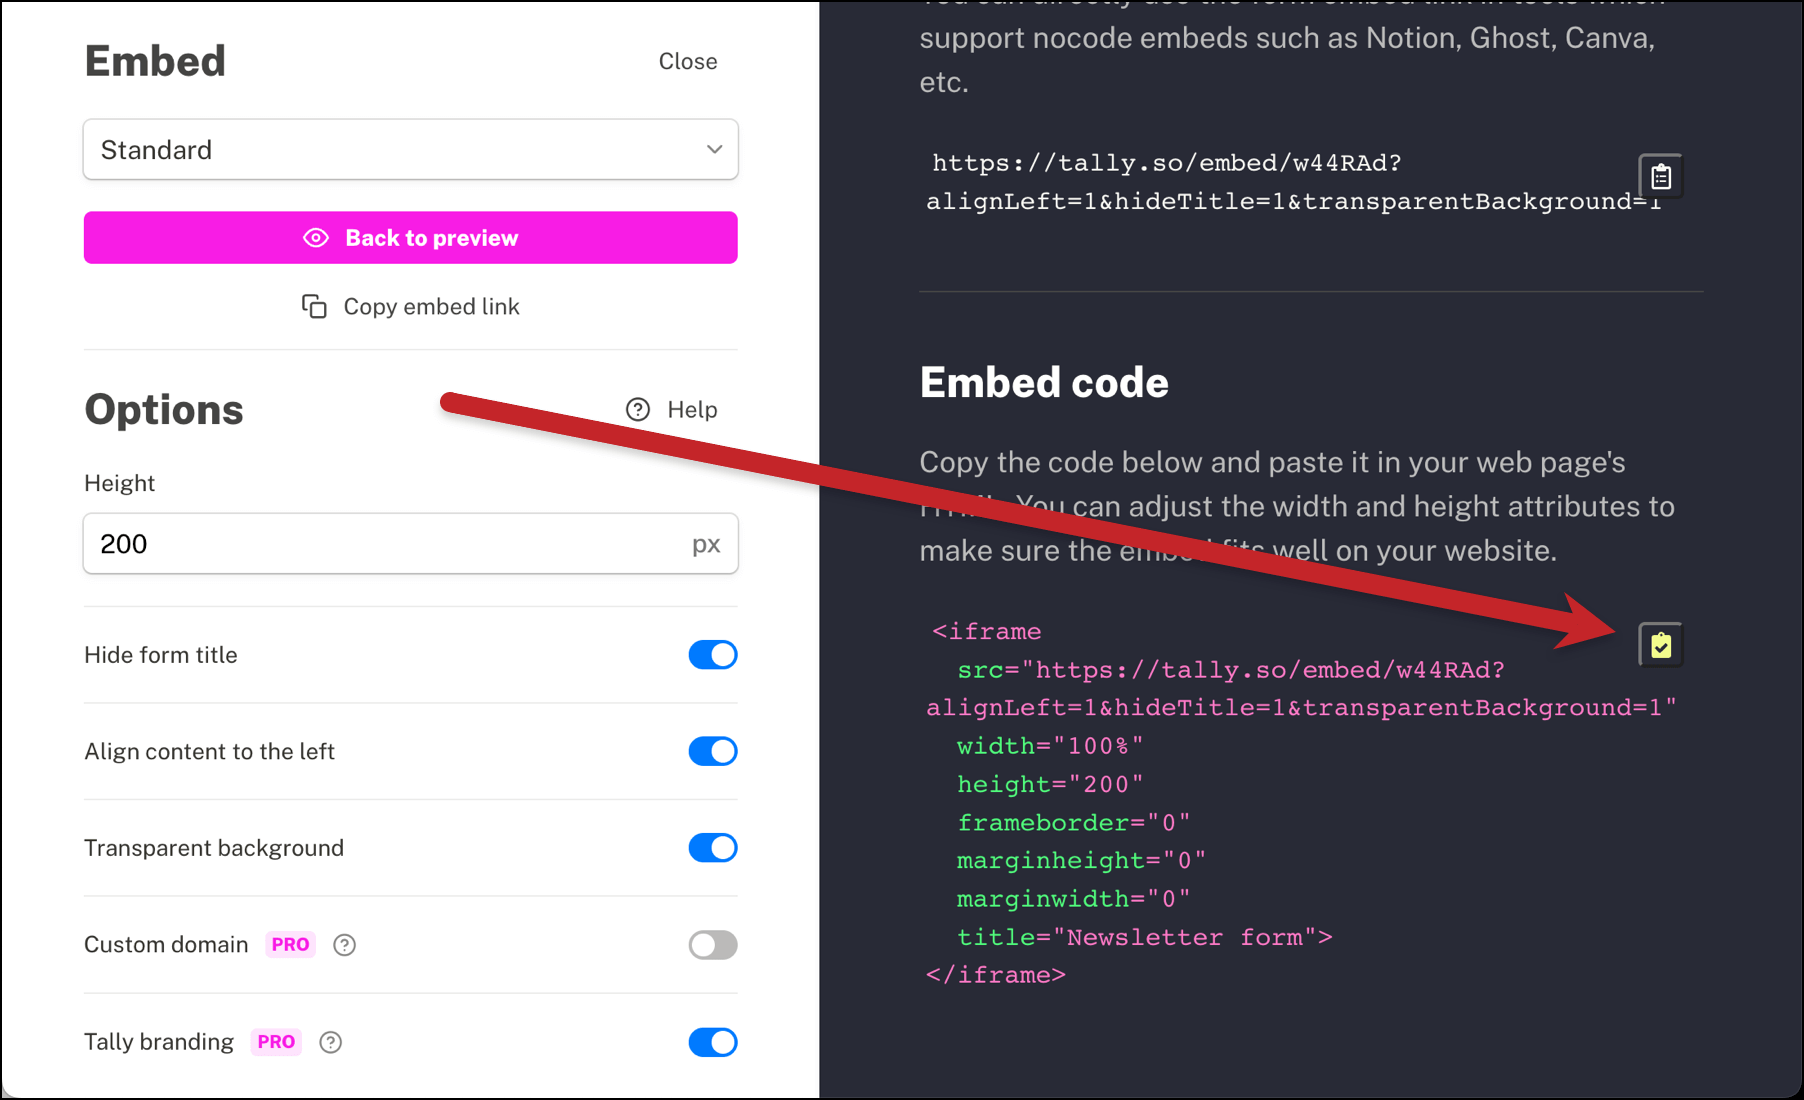 Copy the code embed